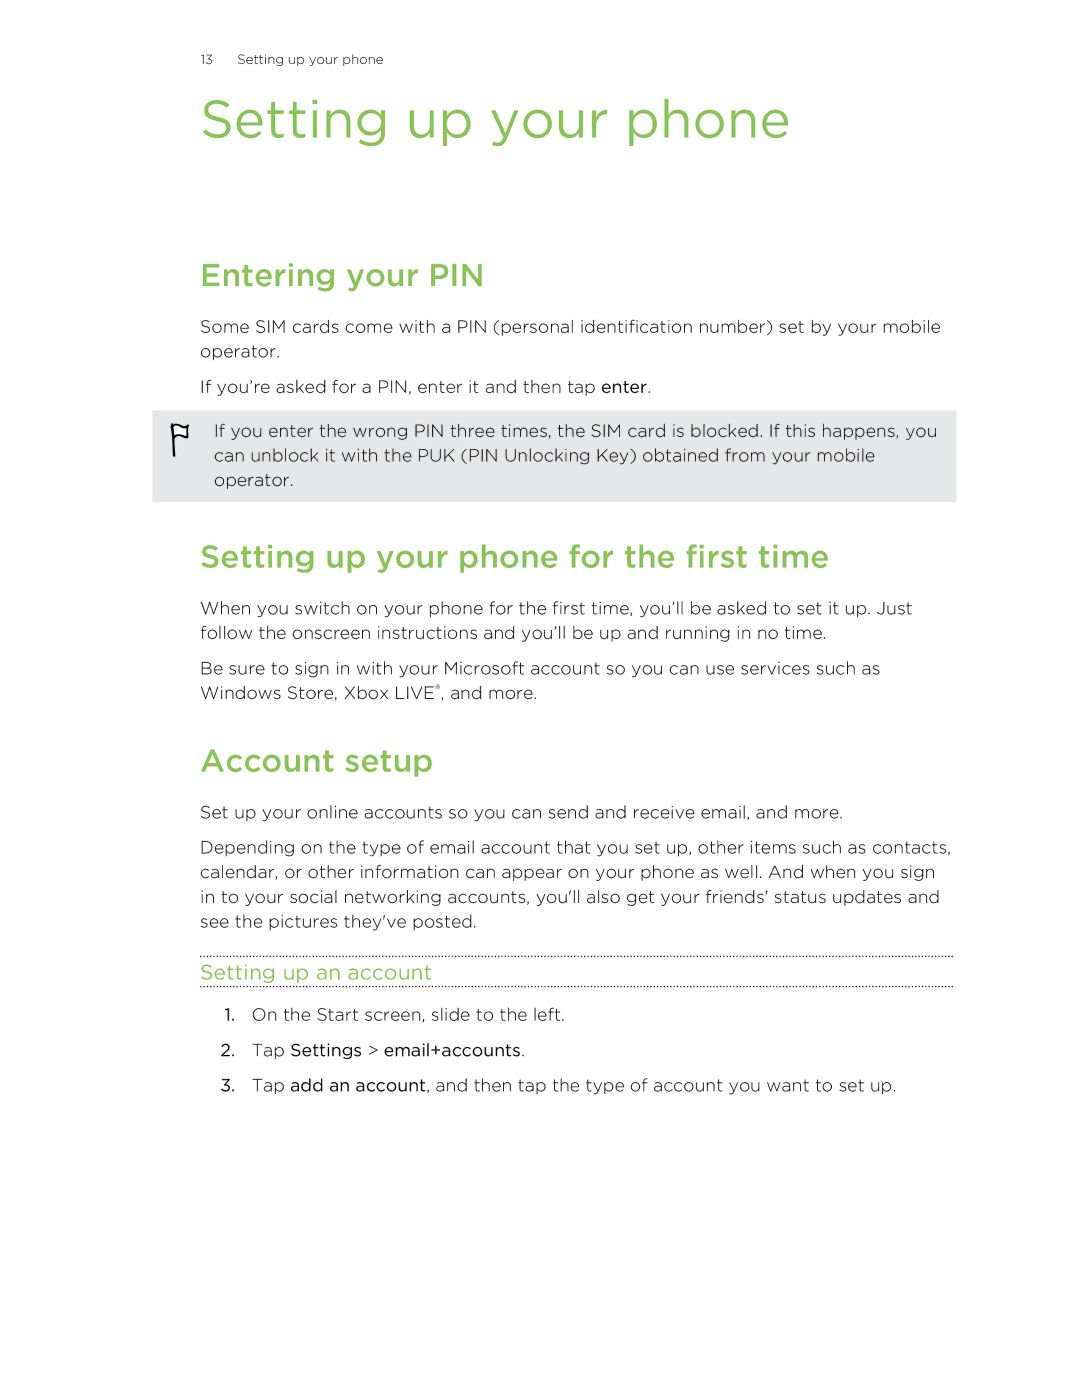 HTC 8X manual Entering your PIN, Setting up your phone for the first time, Account setup, Setting up an account 